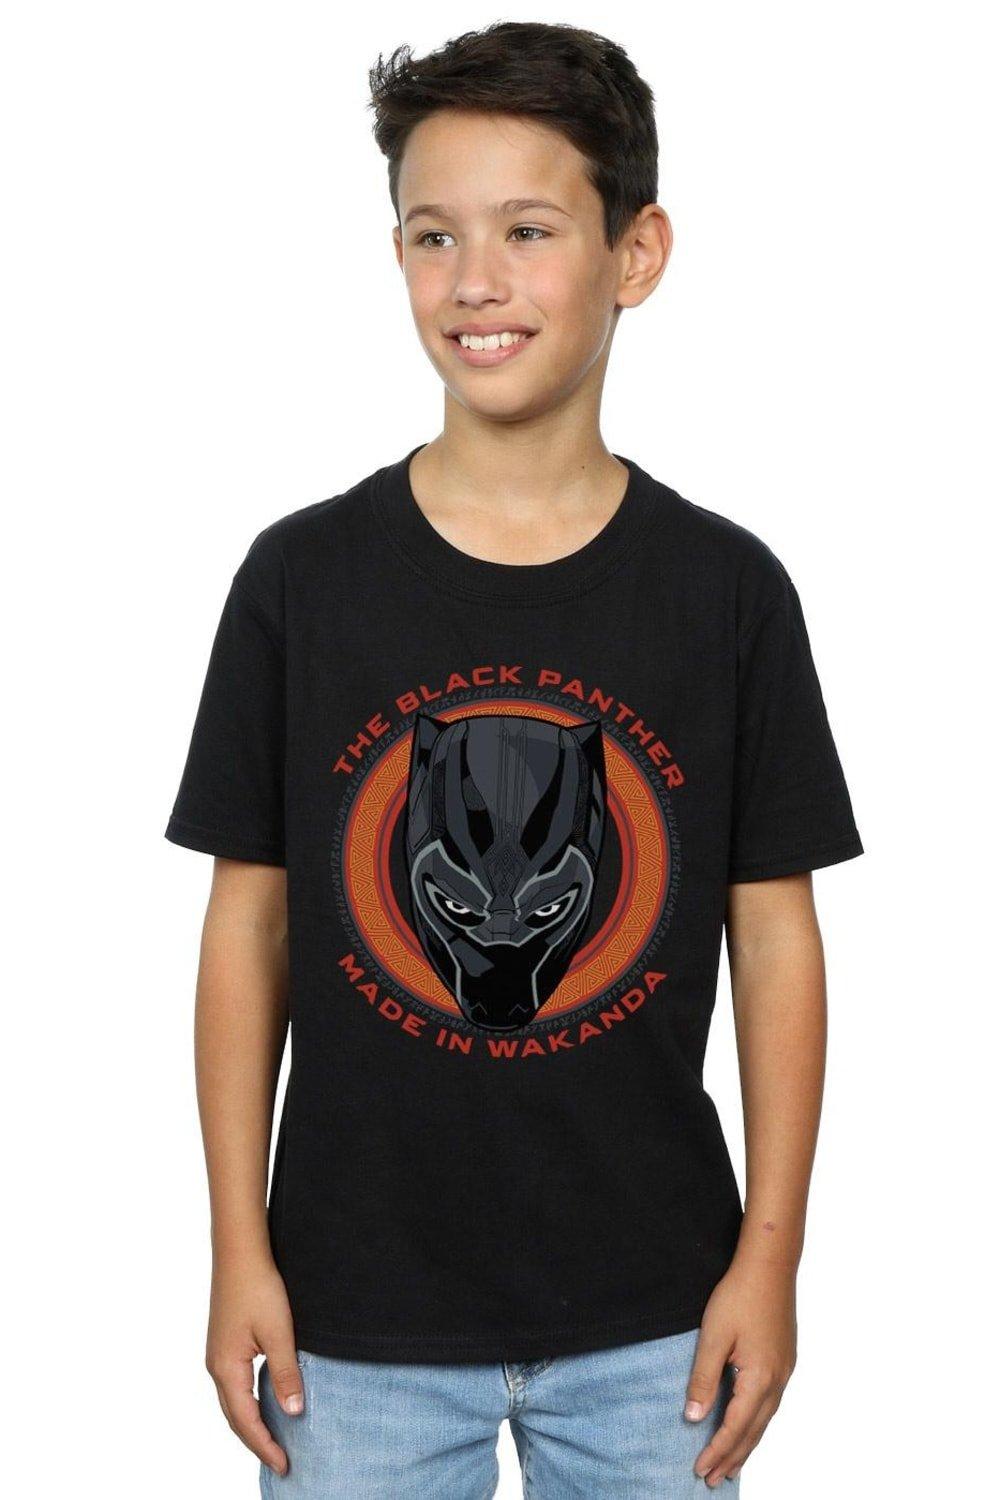 Black Panther Made in Wakanda Red T-Shirt